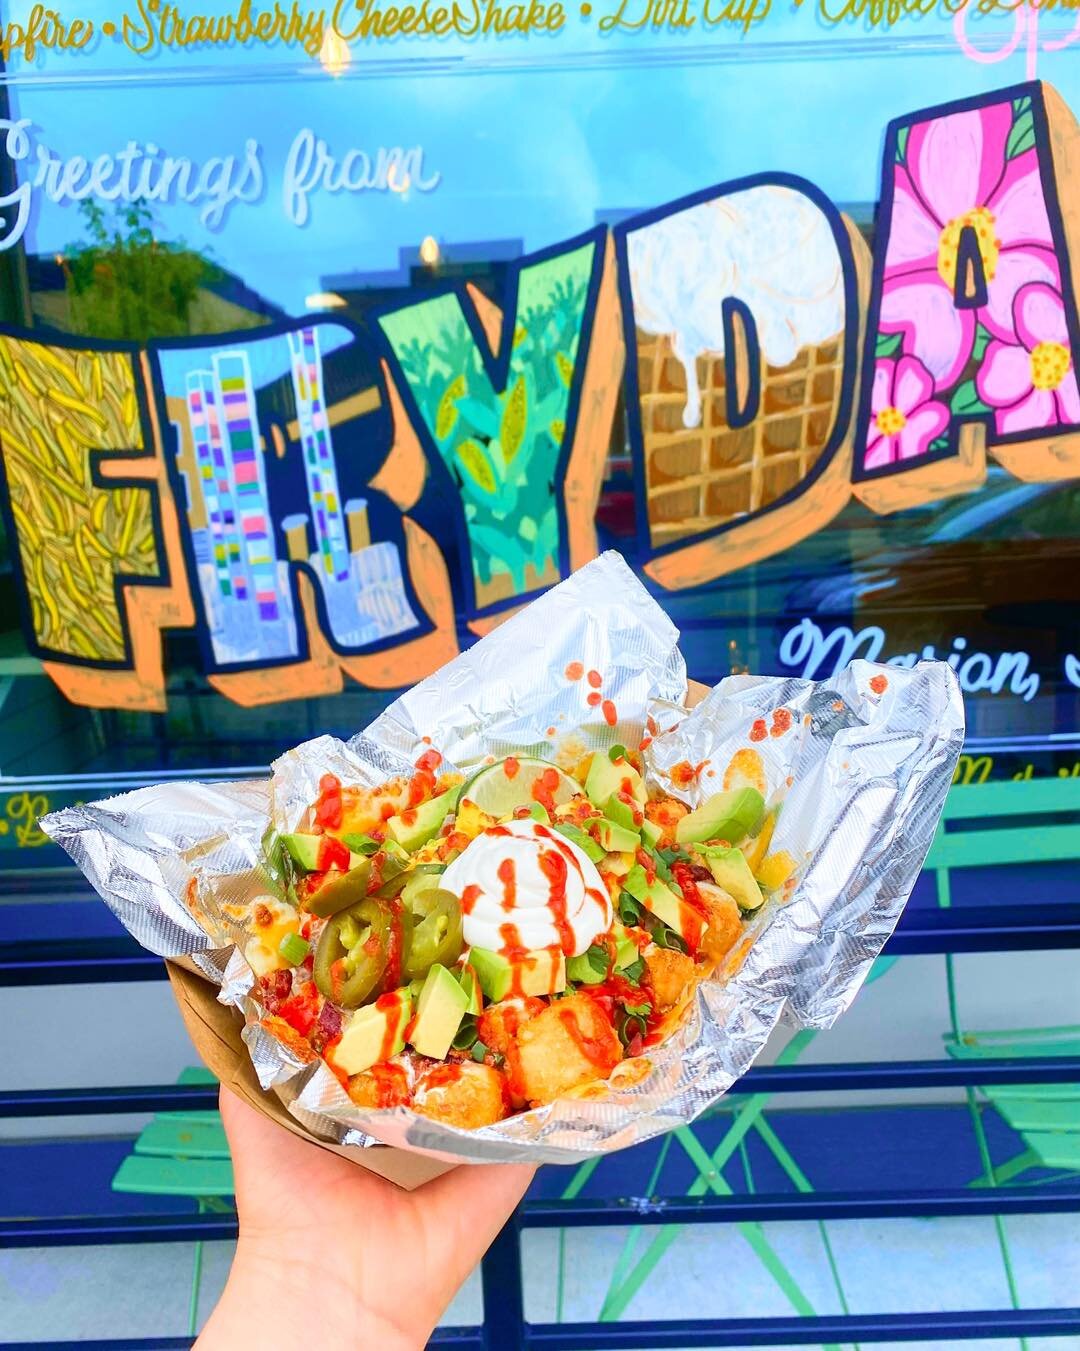 🖼️ ‼️ We&rsquo;re opening early ‼️🖼️

The Marion Arts Fest is right around the corner, and we&rsquo;ve got some real fun things planned! 

🌅Frydae is opening at 9 am on Saturday, May 20th. 

🍳We&rsquo;ll be serving these delicious ✨Loaded Breakfa